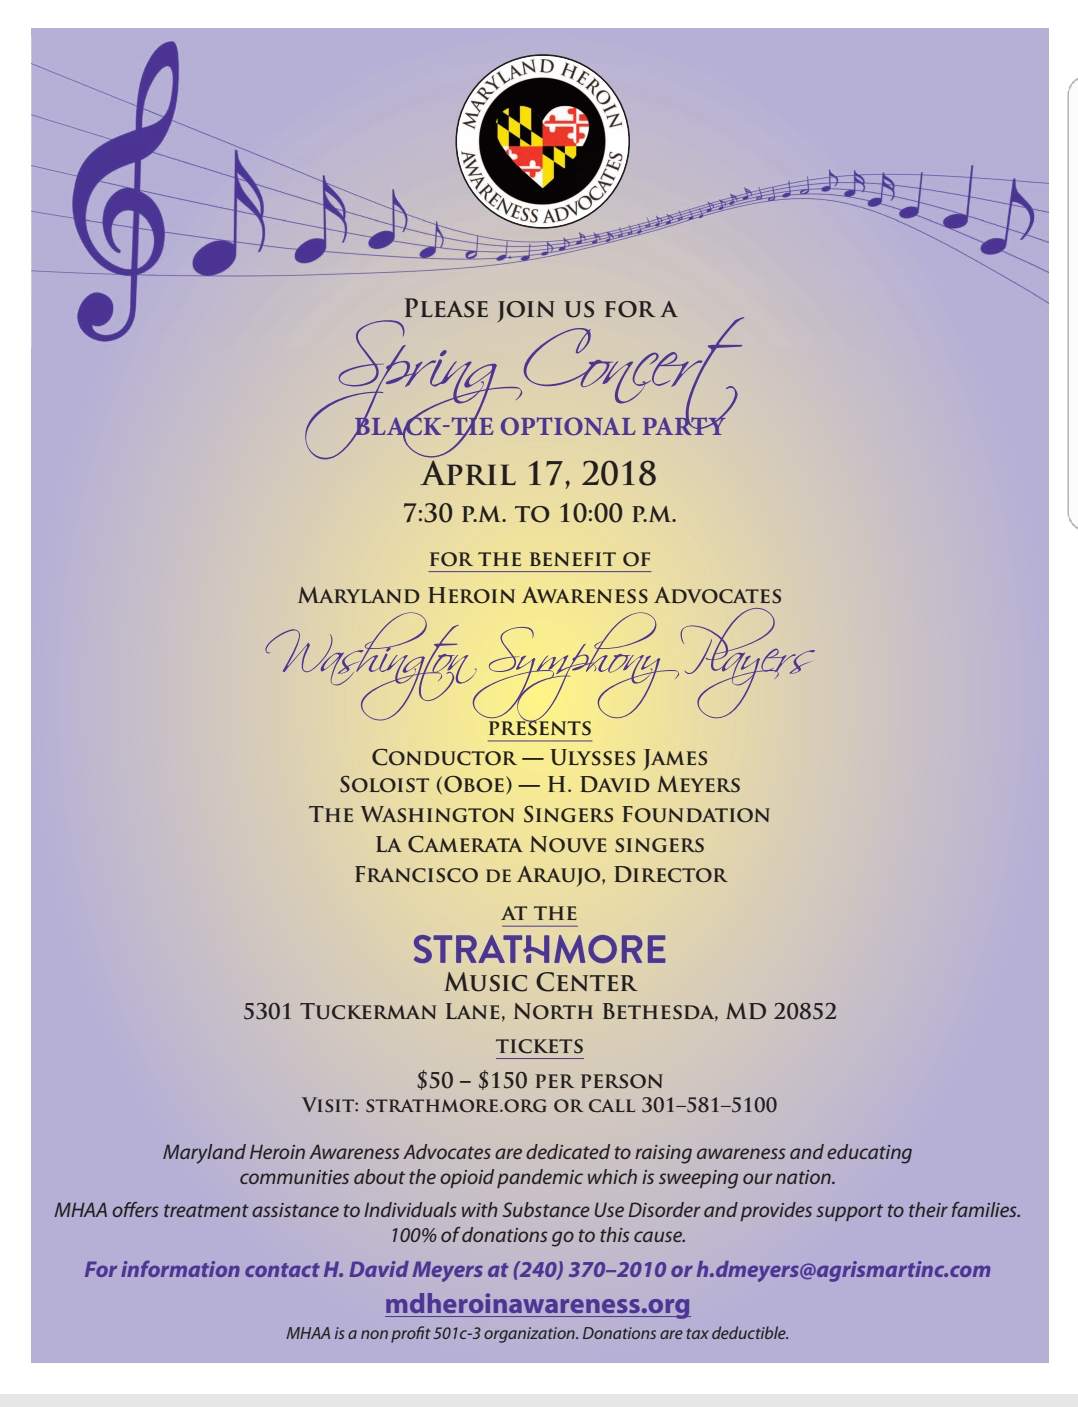 AgriSmart Chairman, H. David Meyers to be an oboe soloist at a fundraiser concert for Maryland Heroin Awareness Advocates with the Washington Symphony Players at the Strathmore Music Center on April 17, 2018, 7:30 - 10 PM.